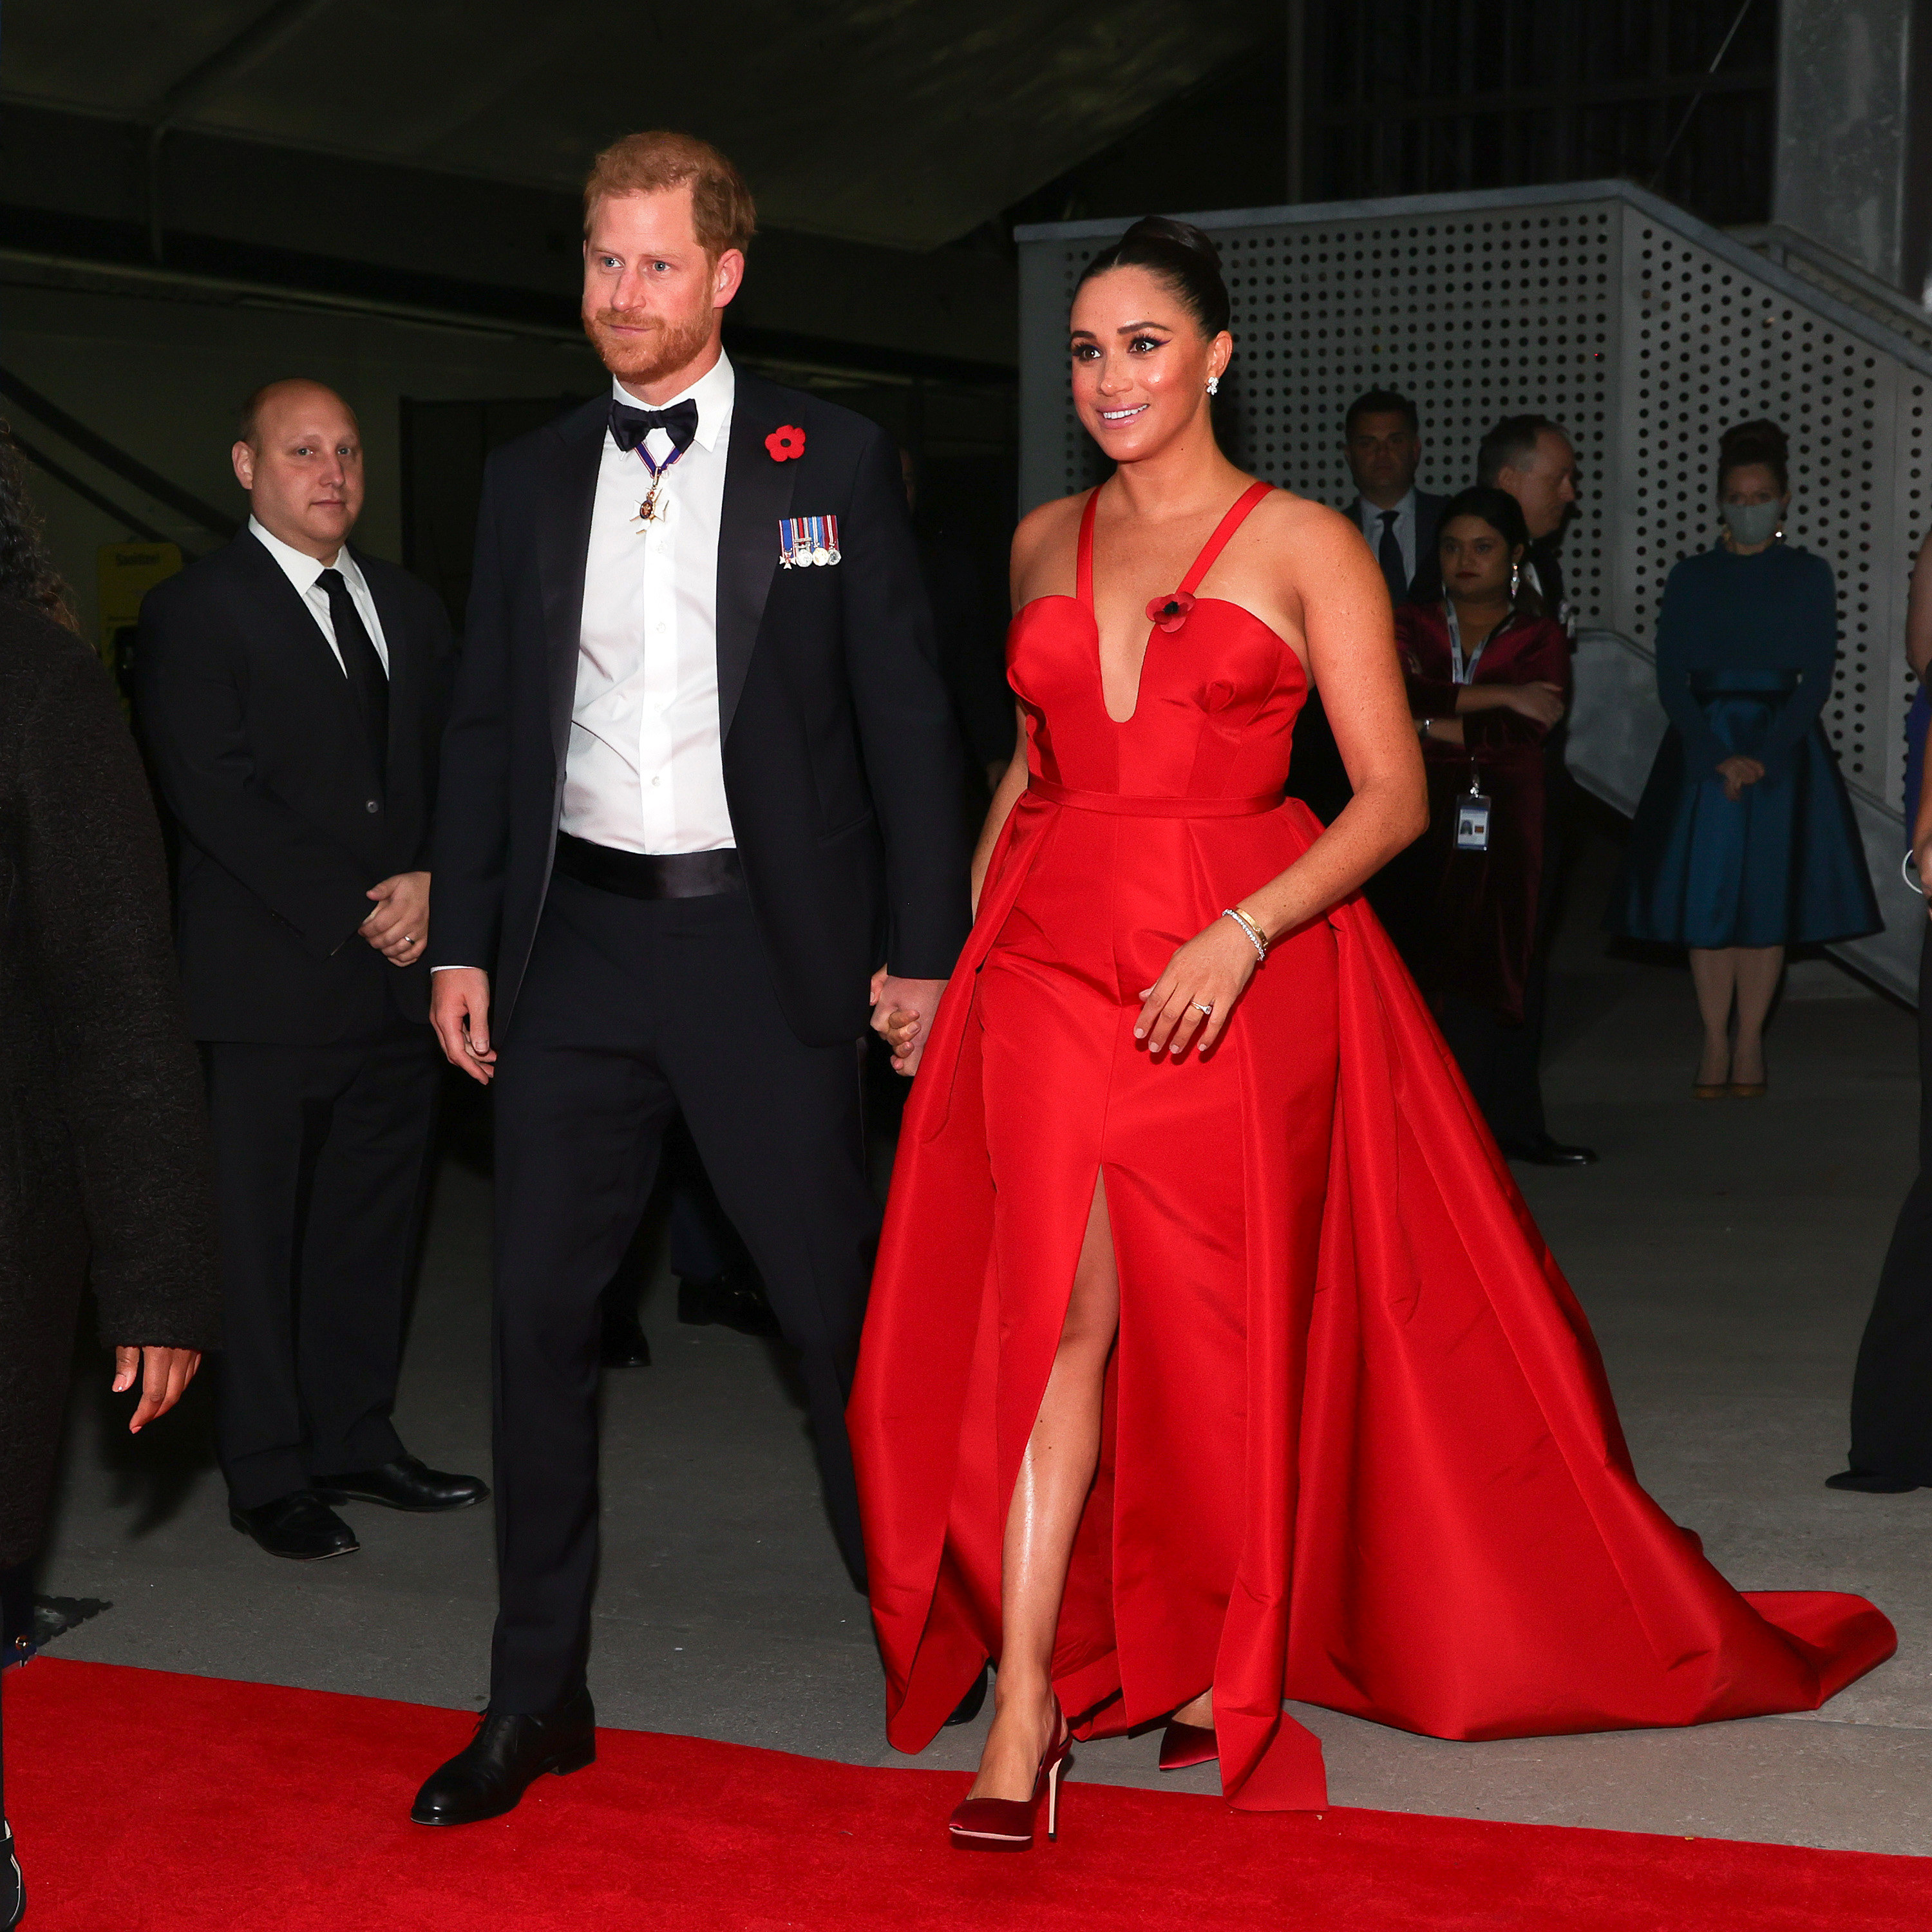 The Duke and Duchess walking into an event hand-in-hand